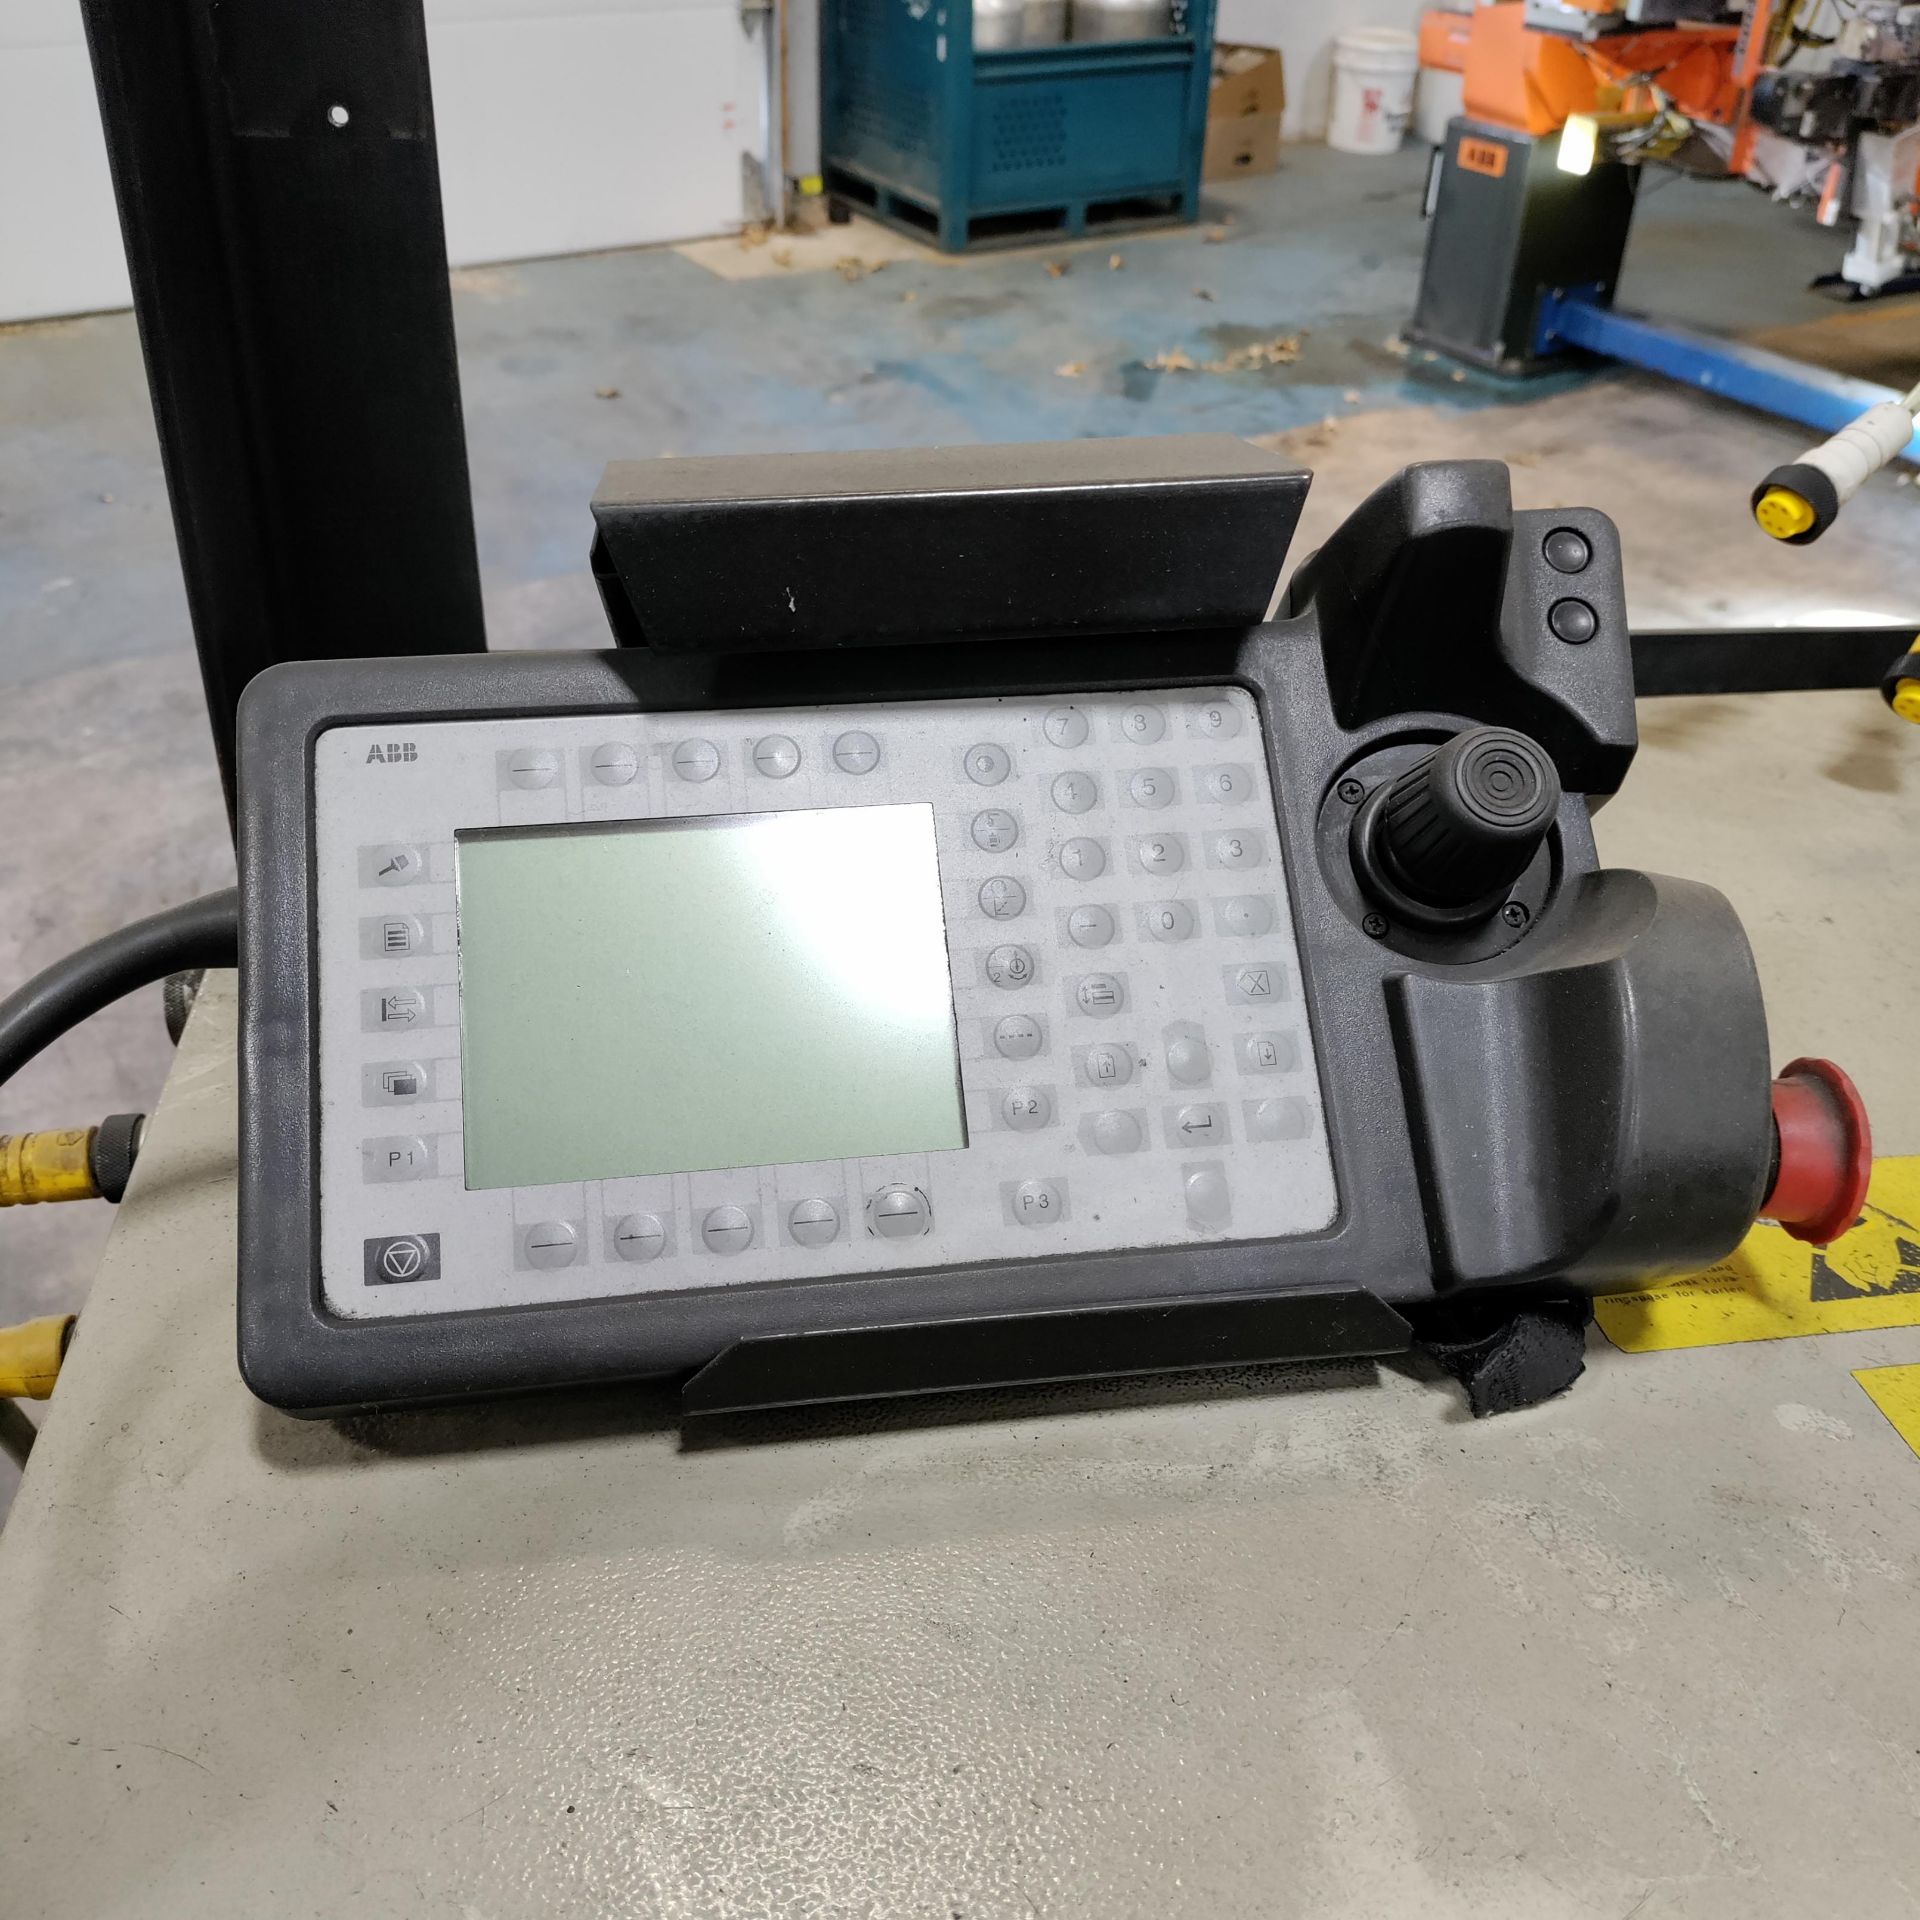 ABB ROBOT IRB 6400 SERIES SN 64-23482 WITH CONTROLLER & TEACH PENDANT - Image 7 of 8